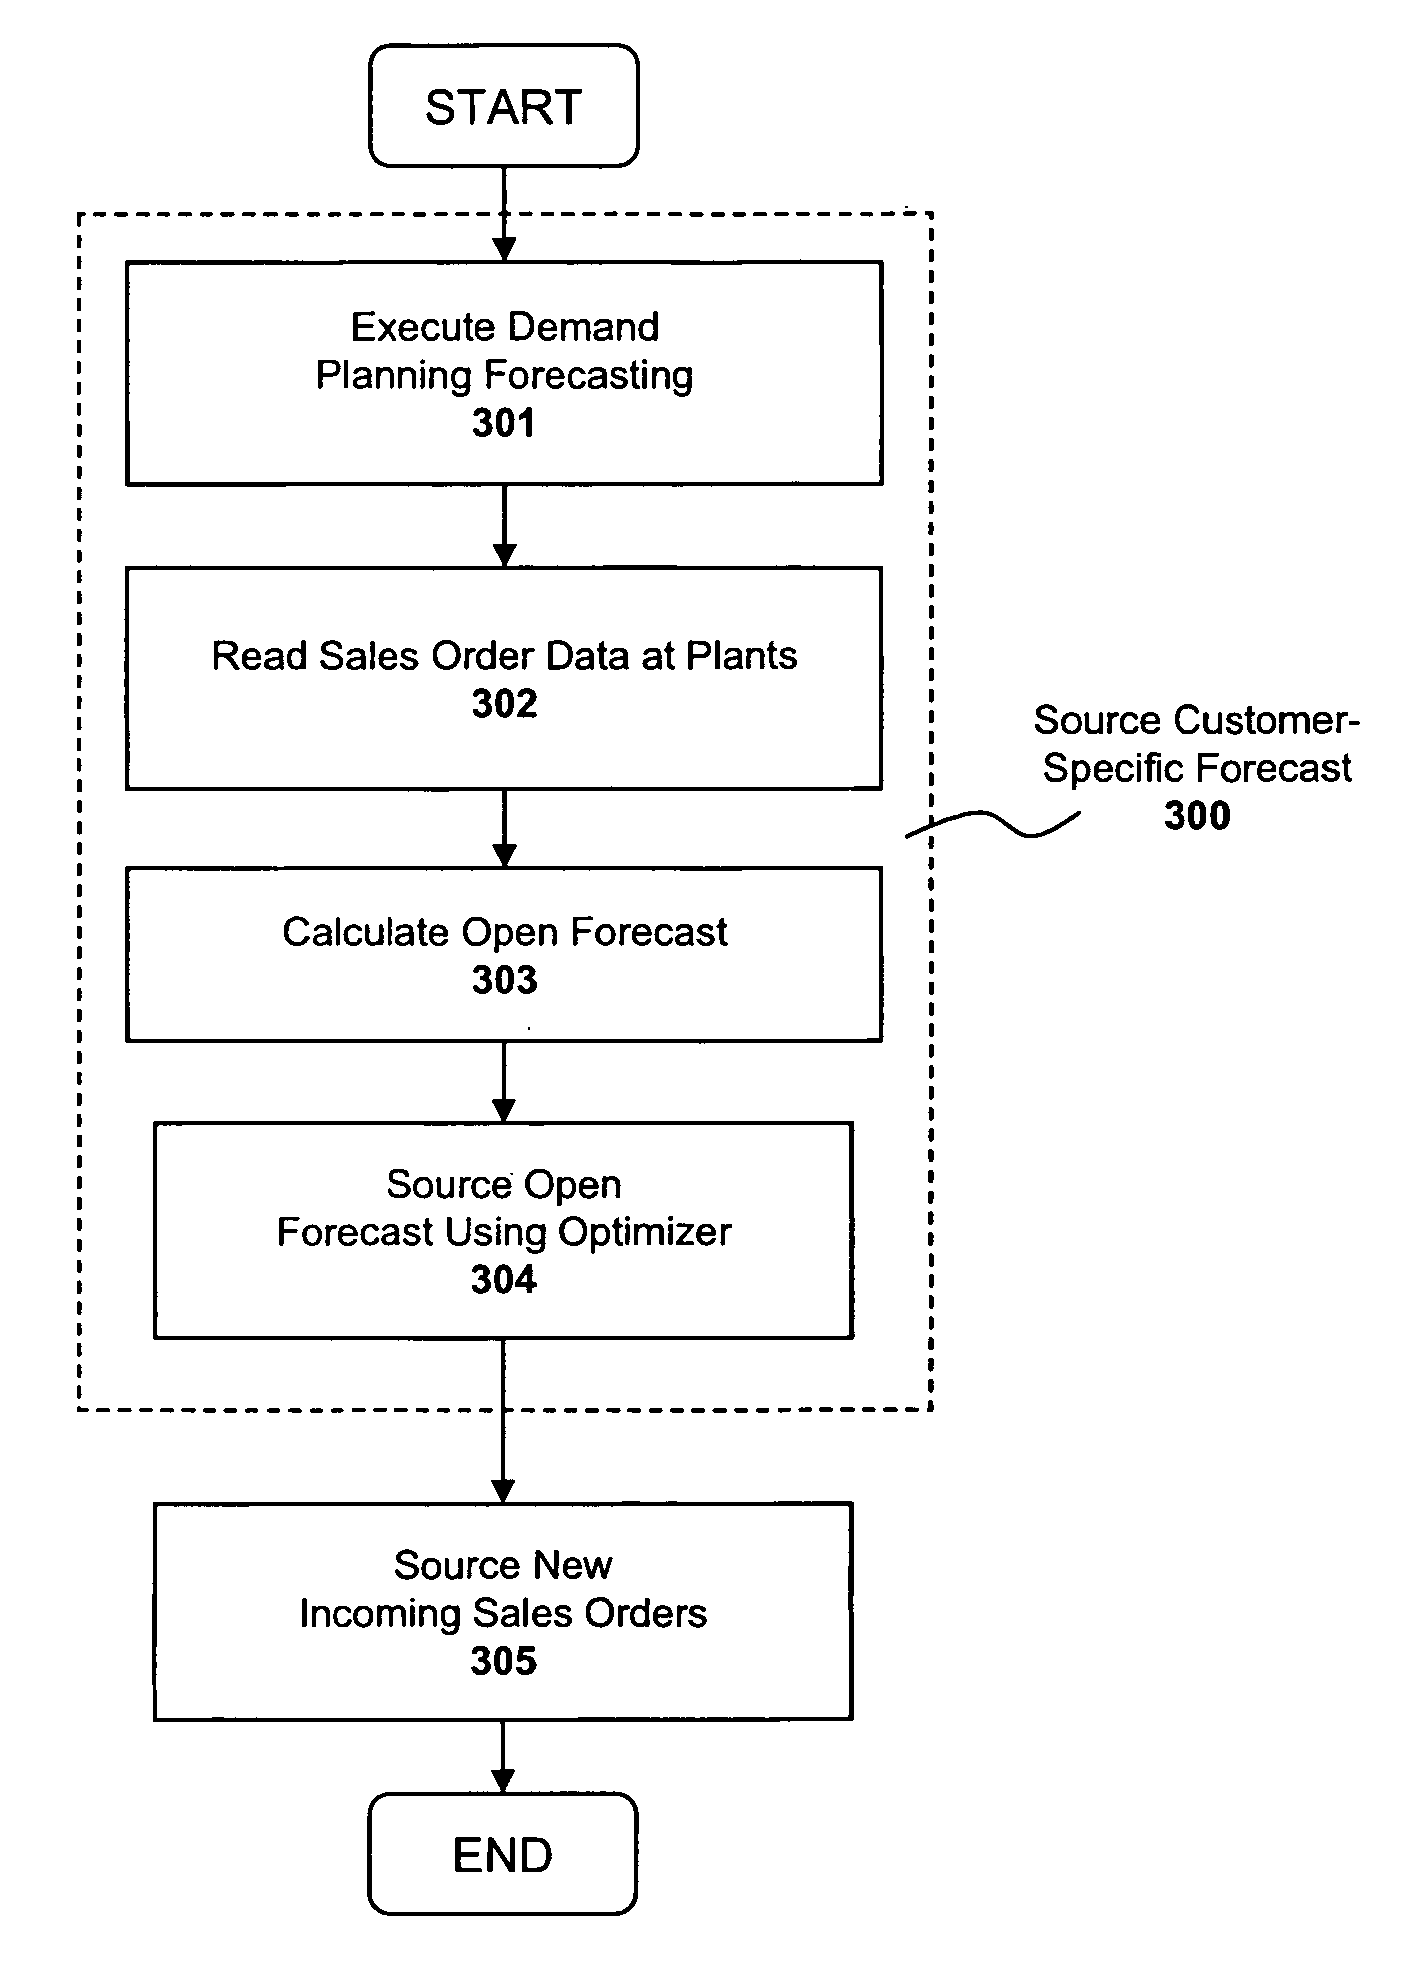 System and method for sourcing a demand forecast within a supply chain management system